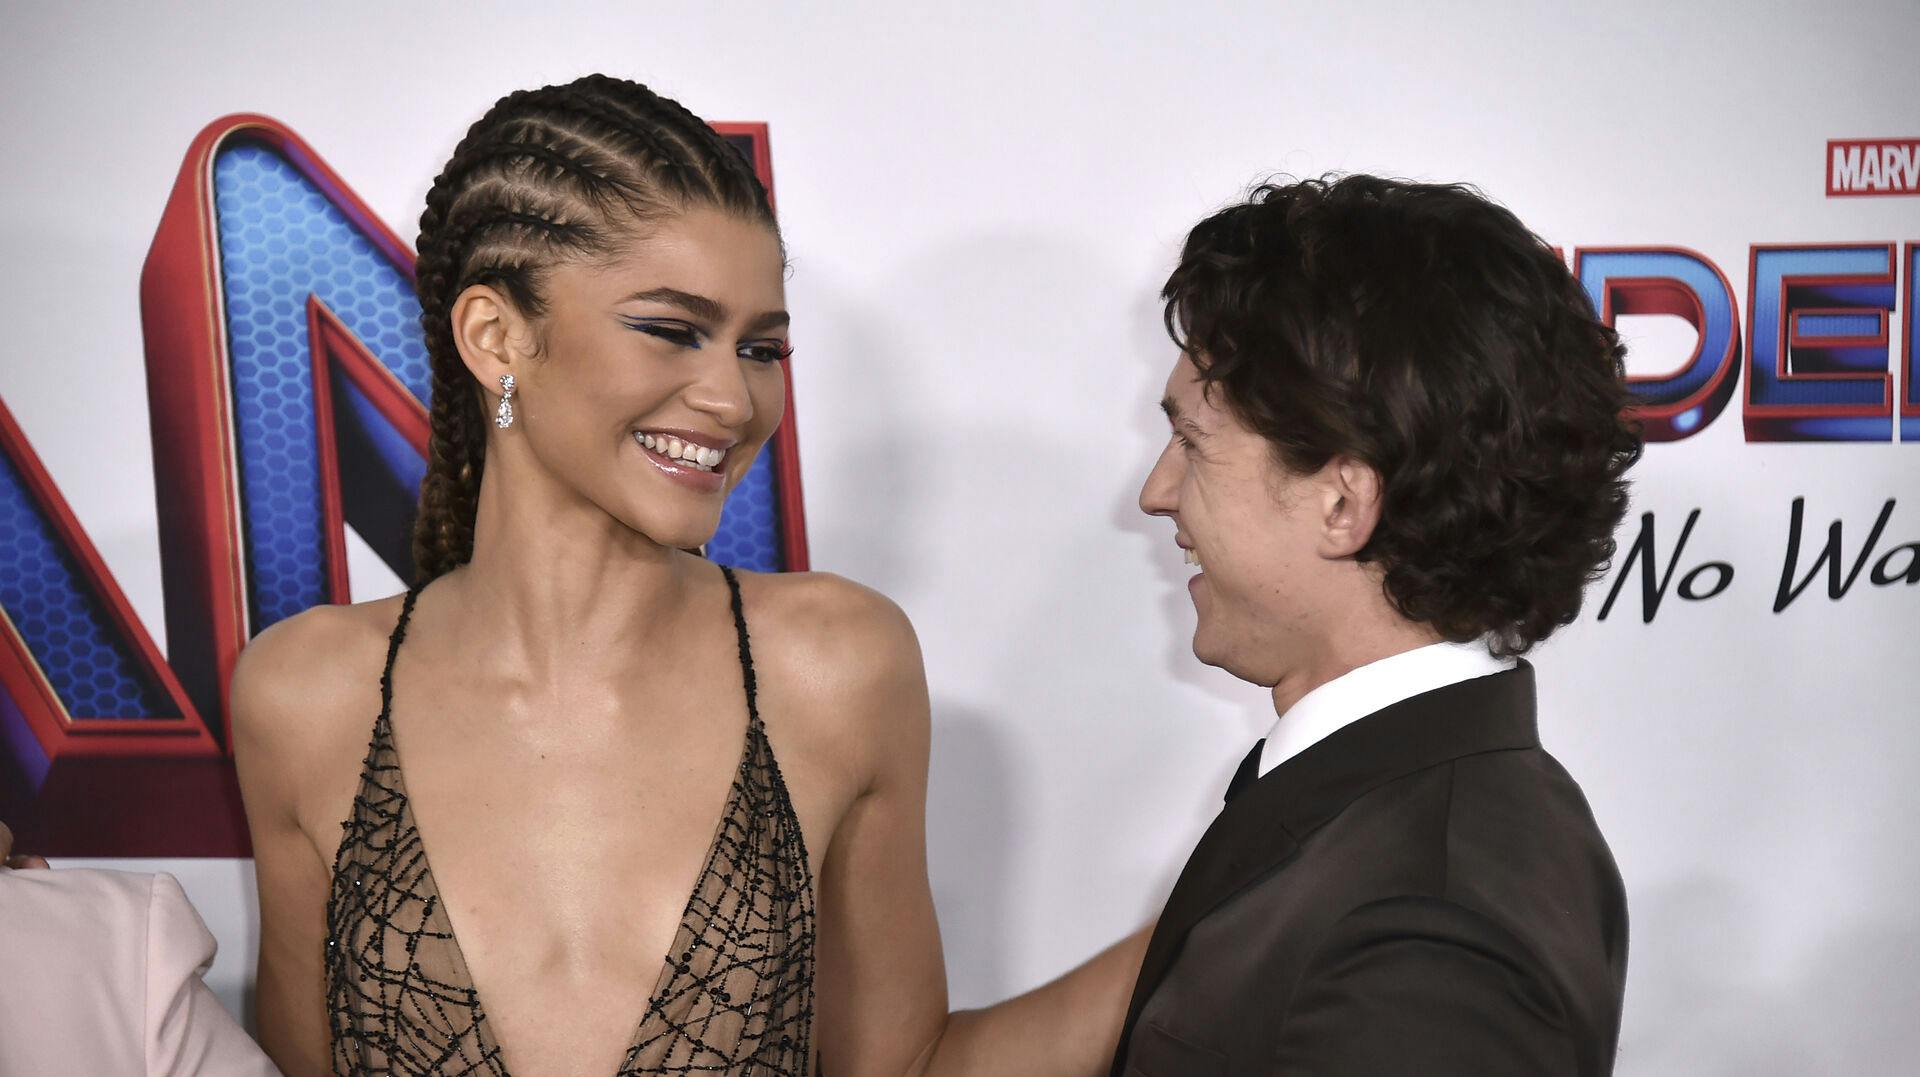 Zendaya, left, and Tom Holland arrive at the premiere of "Spider-Man: No Way Home" at the Regency Village Theater on Monday, Dec. 13, 2021, in Los Angeles. (Photo by Jordan Strauss/Invision/AP)